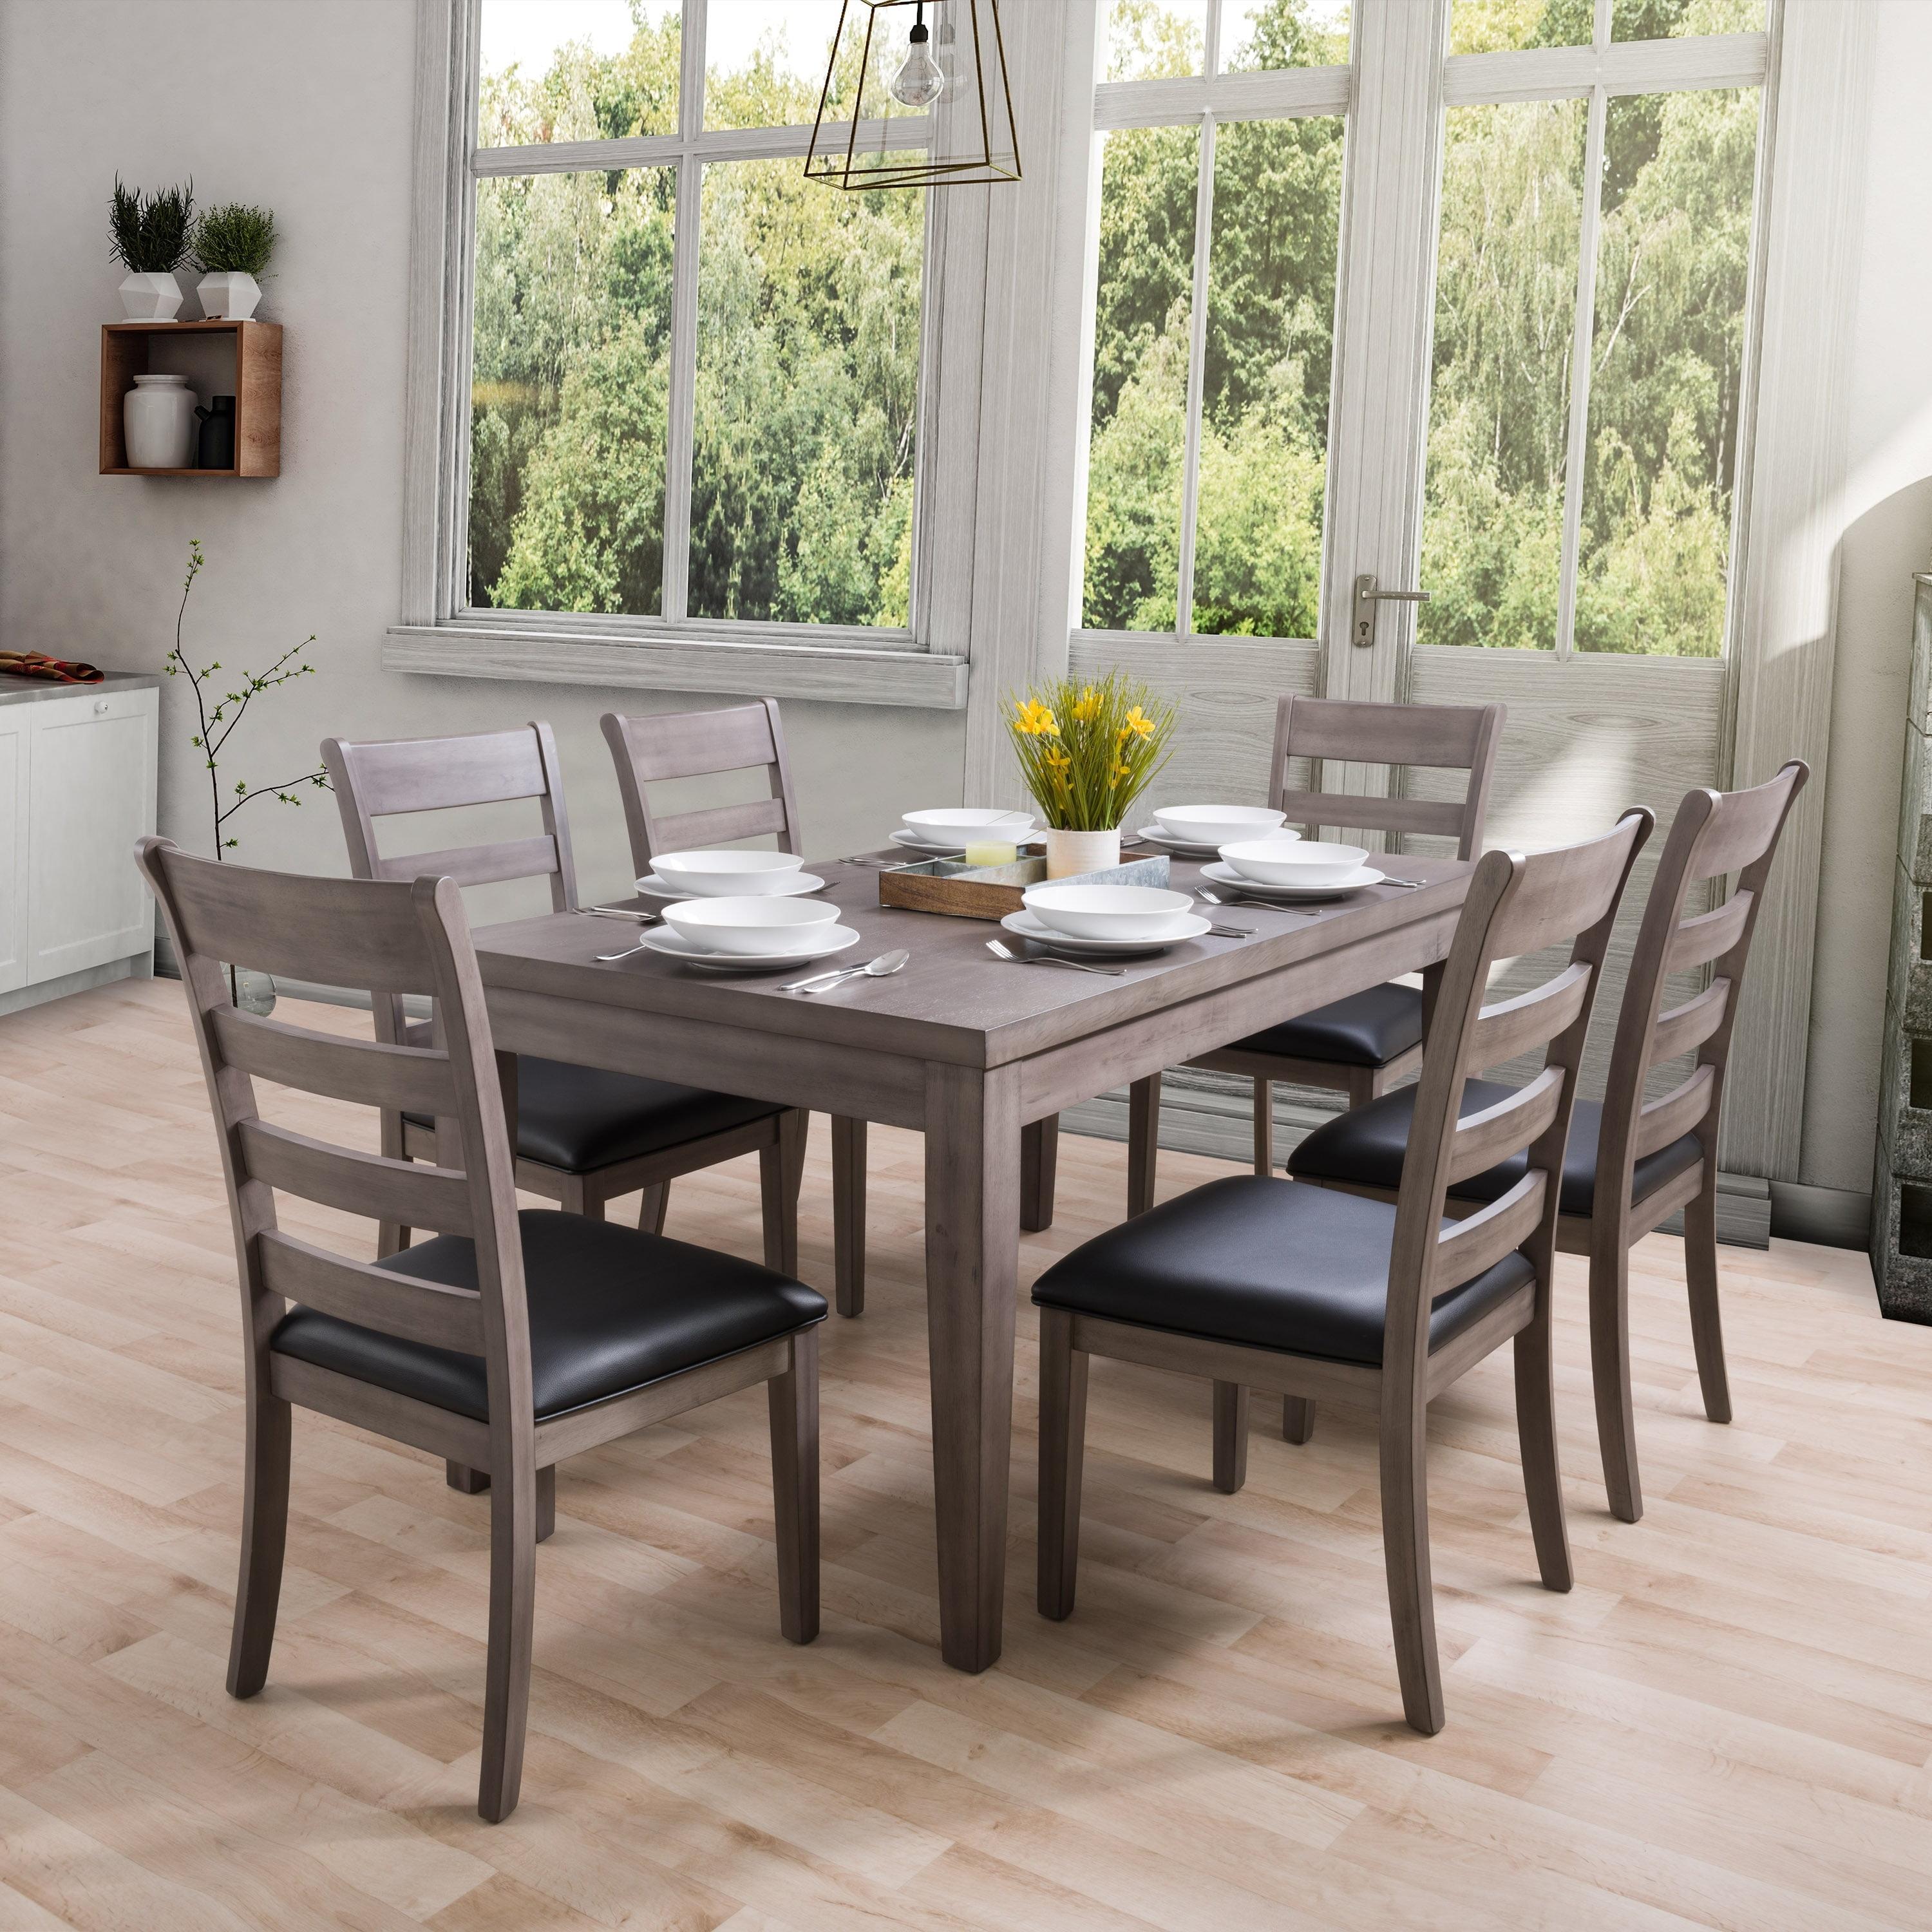 Classic Washed Gray Rectangular Wood Dining Table - Seats 6